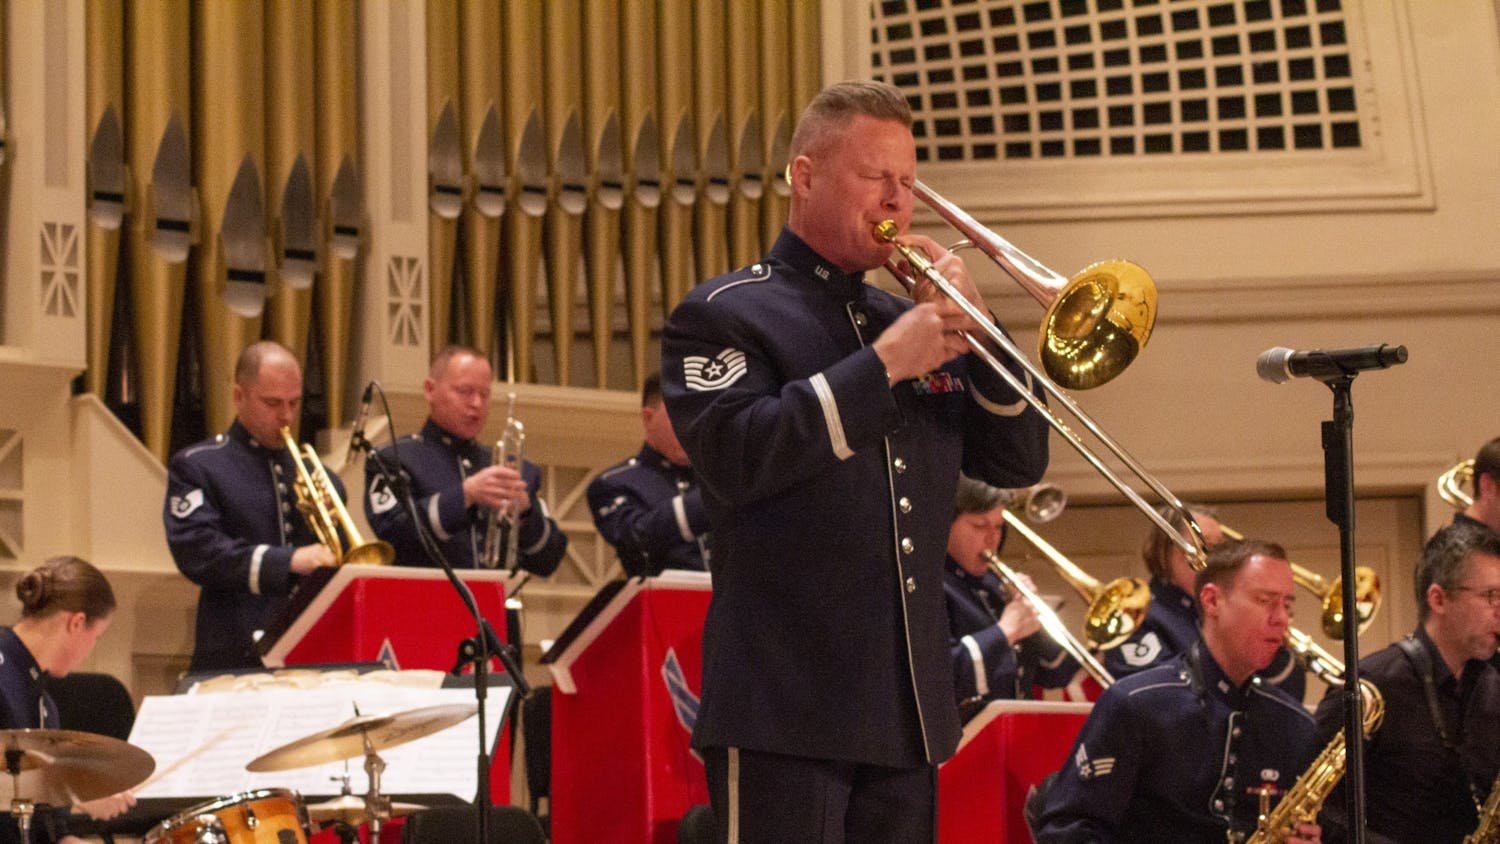 The USAF Band of Mid-America’s Shades of Blue Jazz Ensemble honors veterans